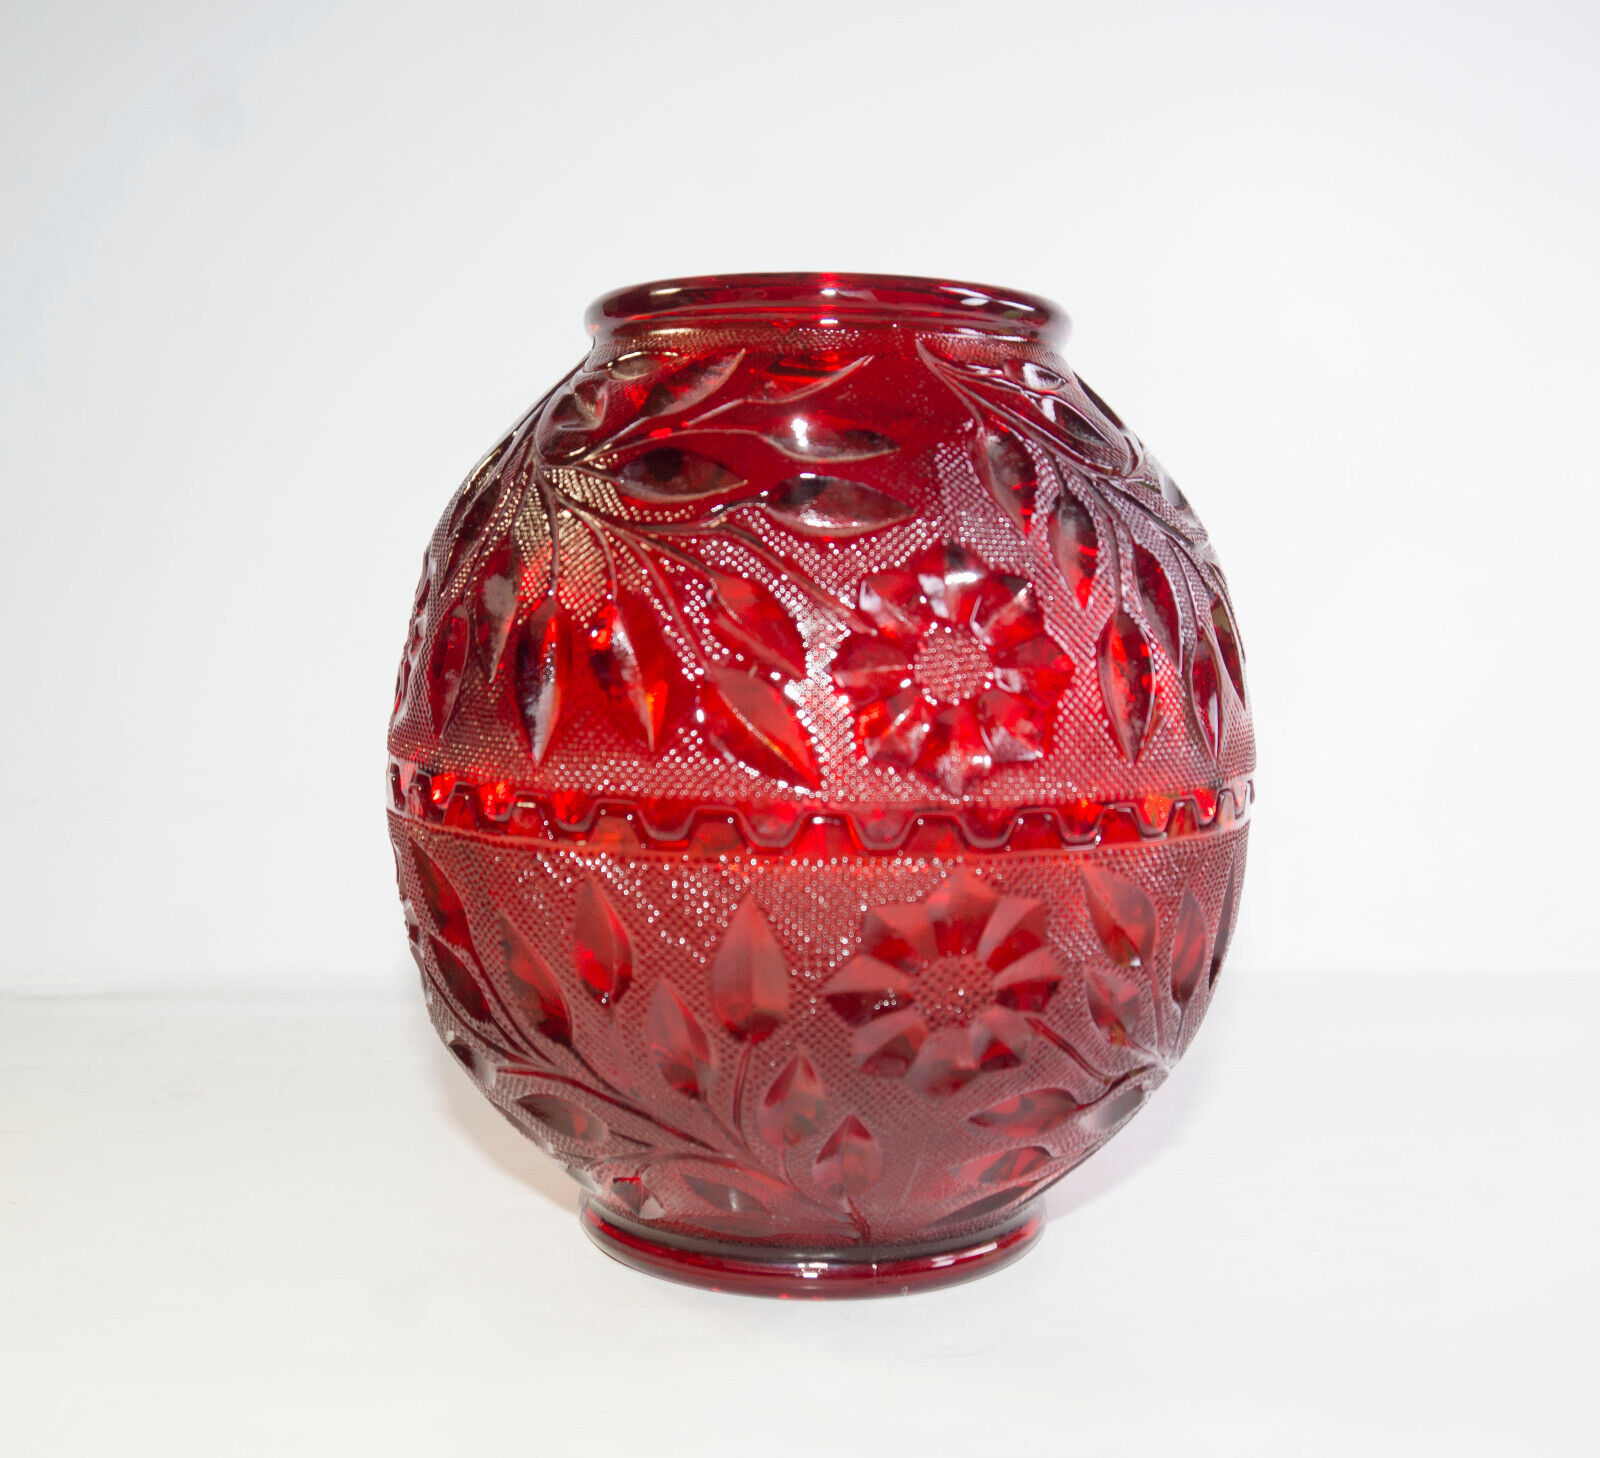 Fireball Fairy Lamp Ruby Red Glass Wildflower Lace Fenton Westmorland Mold Glows